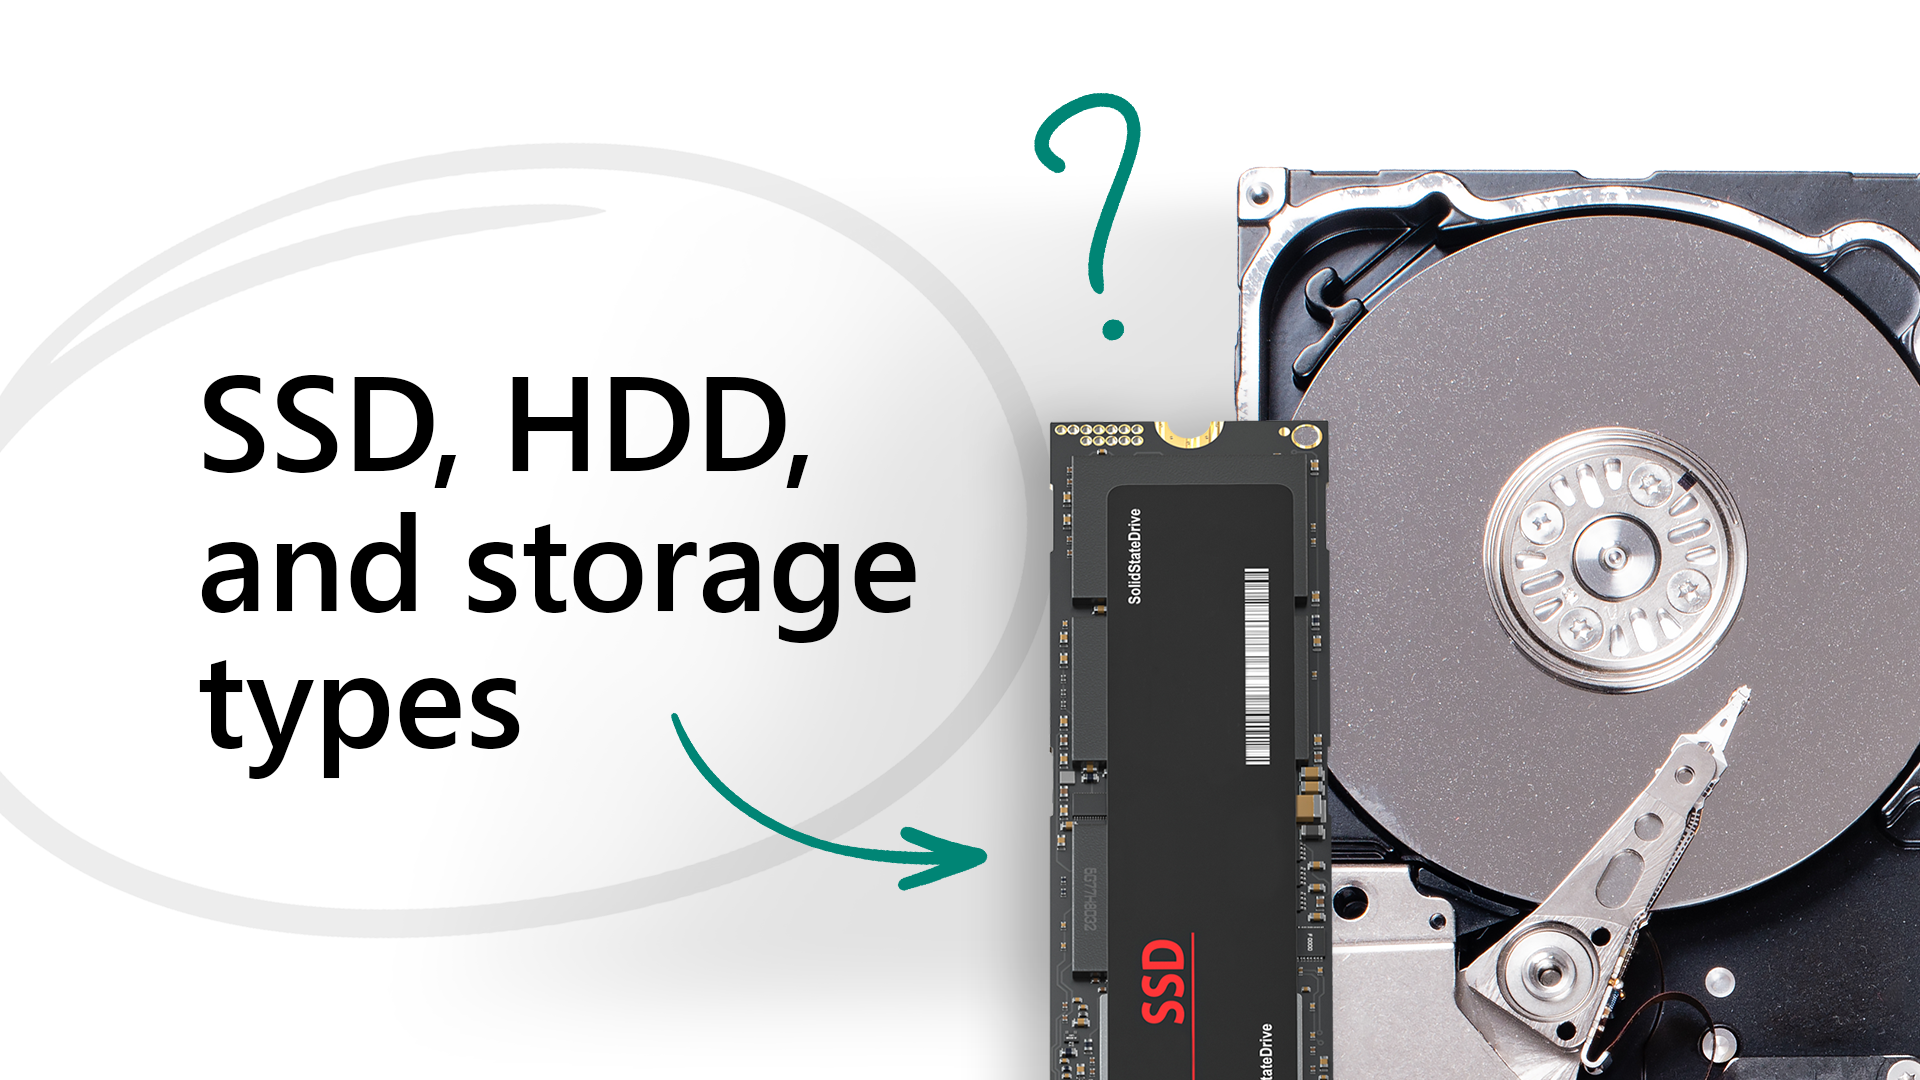 SSD Drives - Solid State Drives for Laptops